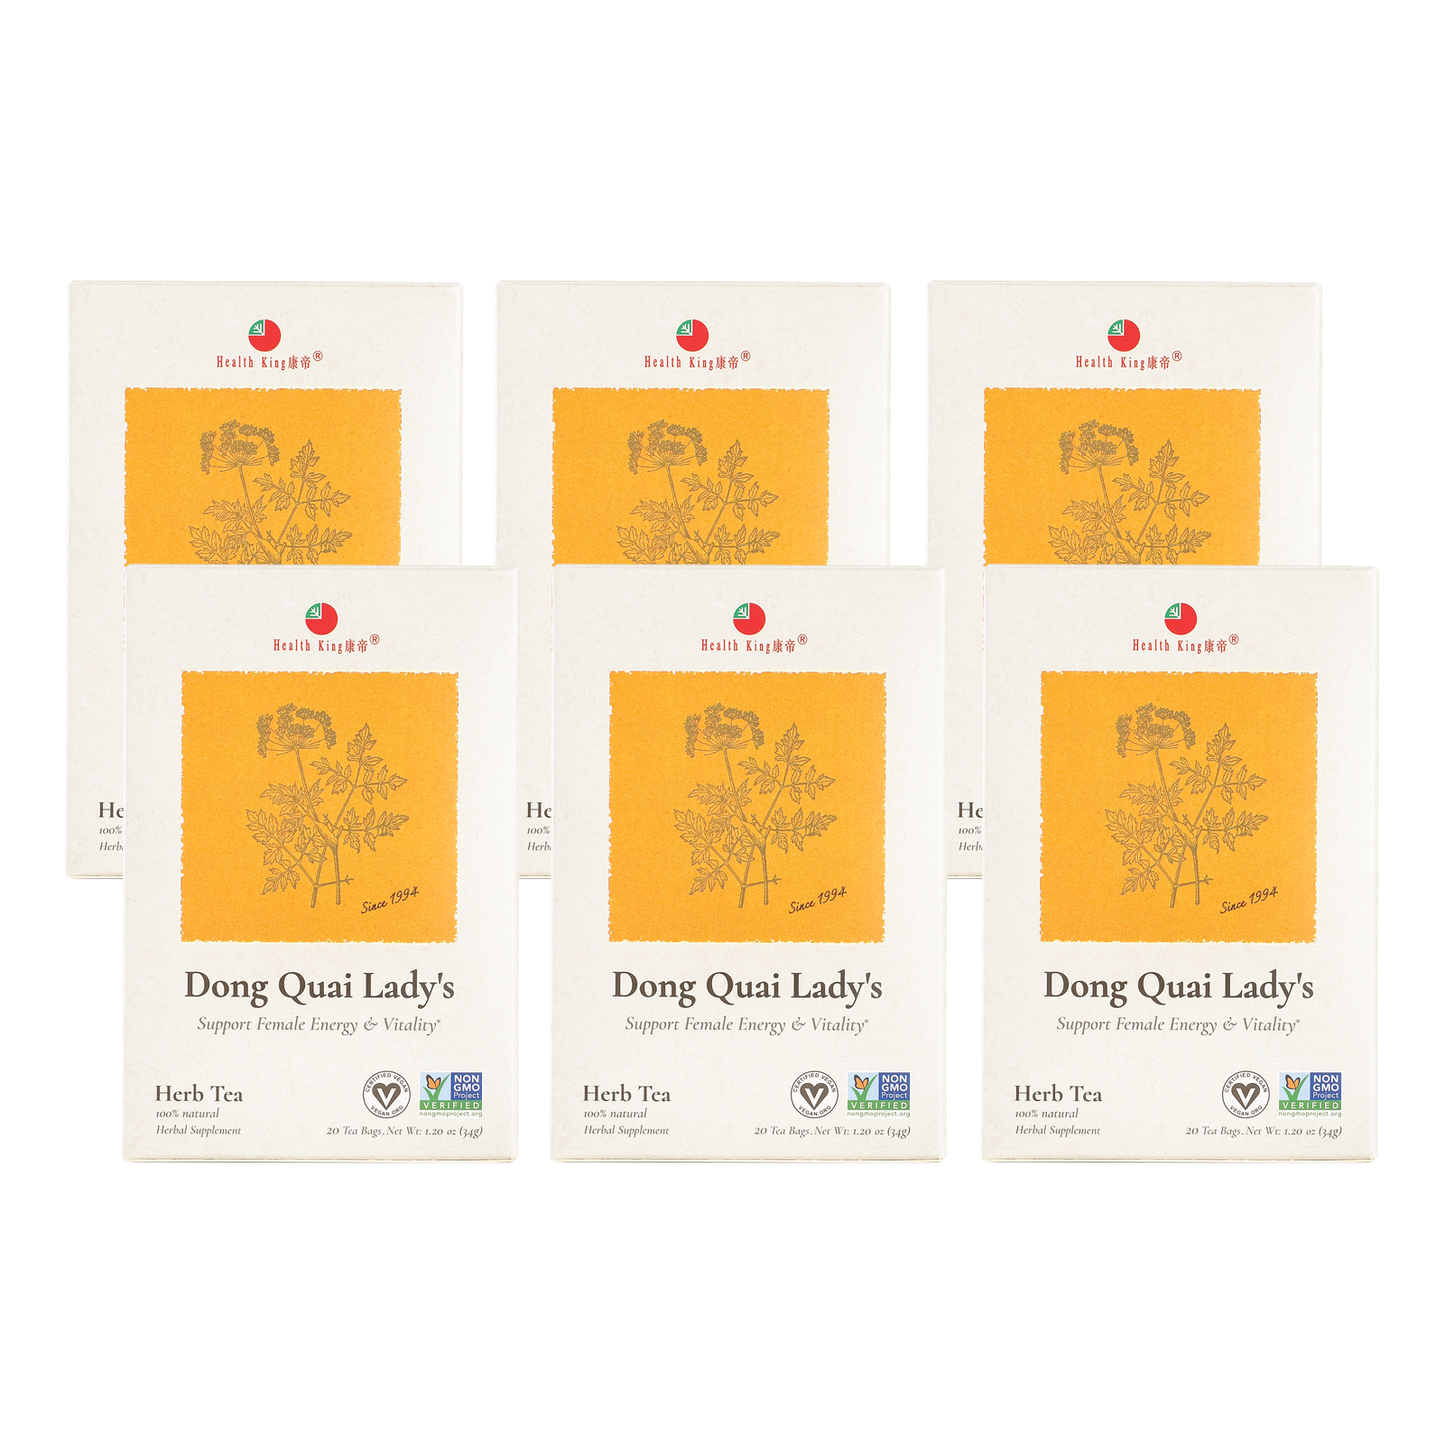 Six pouches of Dong Quai Lady's Herb Tea for easing cramps